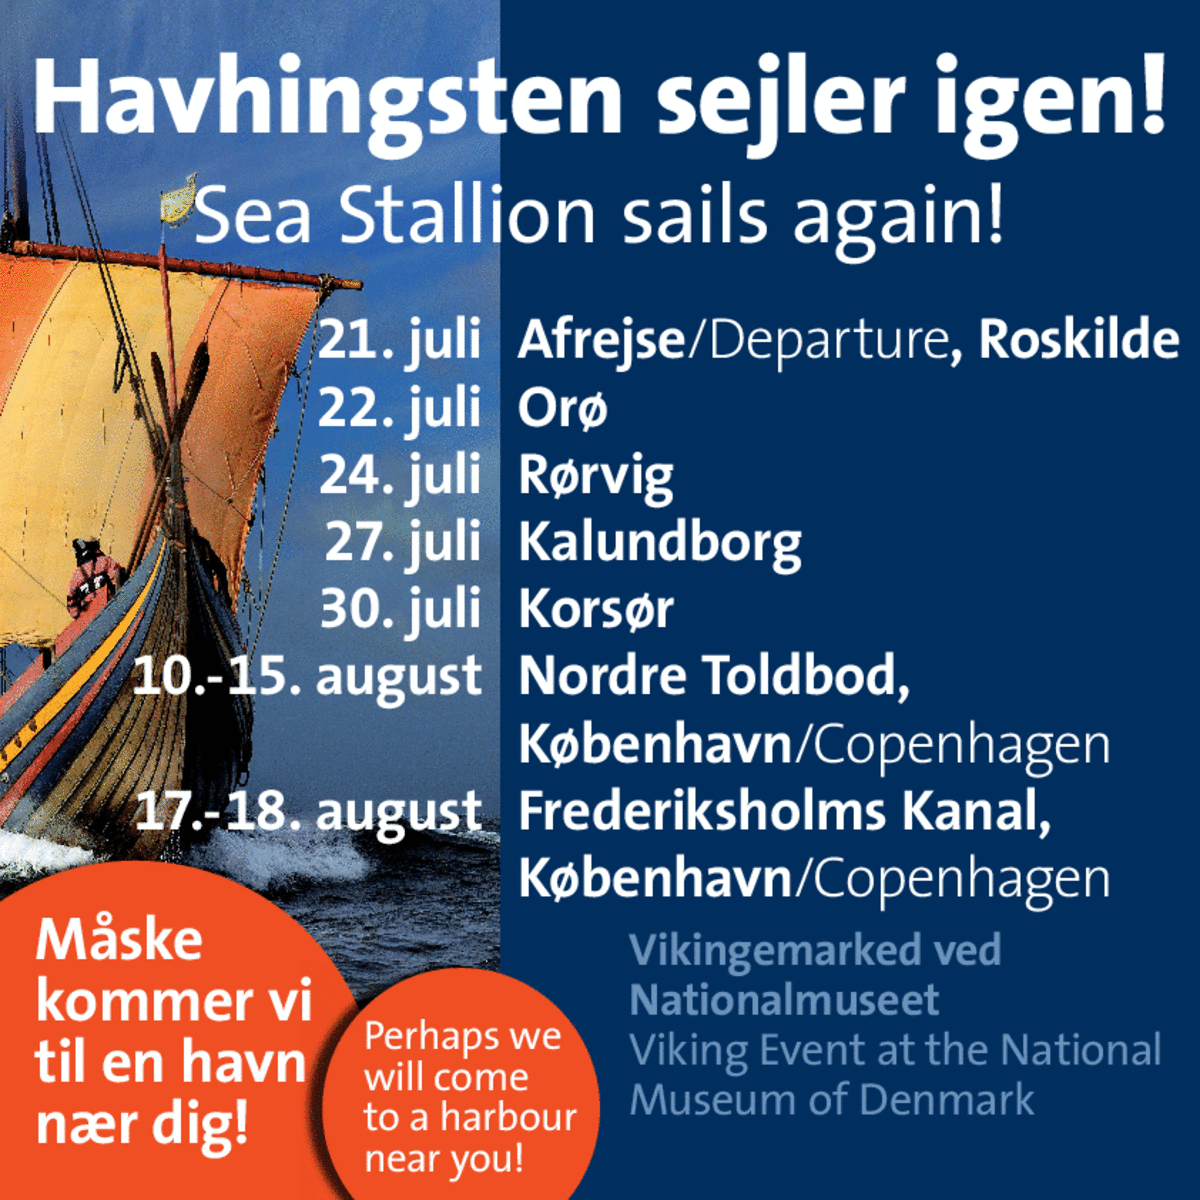 'Havhingsten' in Danish, "Sea Stallion of Glendalough" underwent serious sea trials in 2007 soon after launch, completing a route around northern Scotland and down the Irish Sea to Dublin  These dates are for a later voyage around the Danish isles